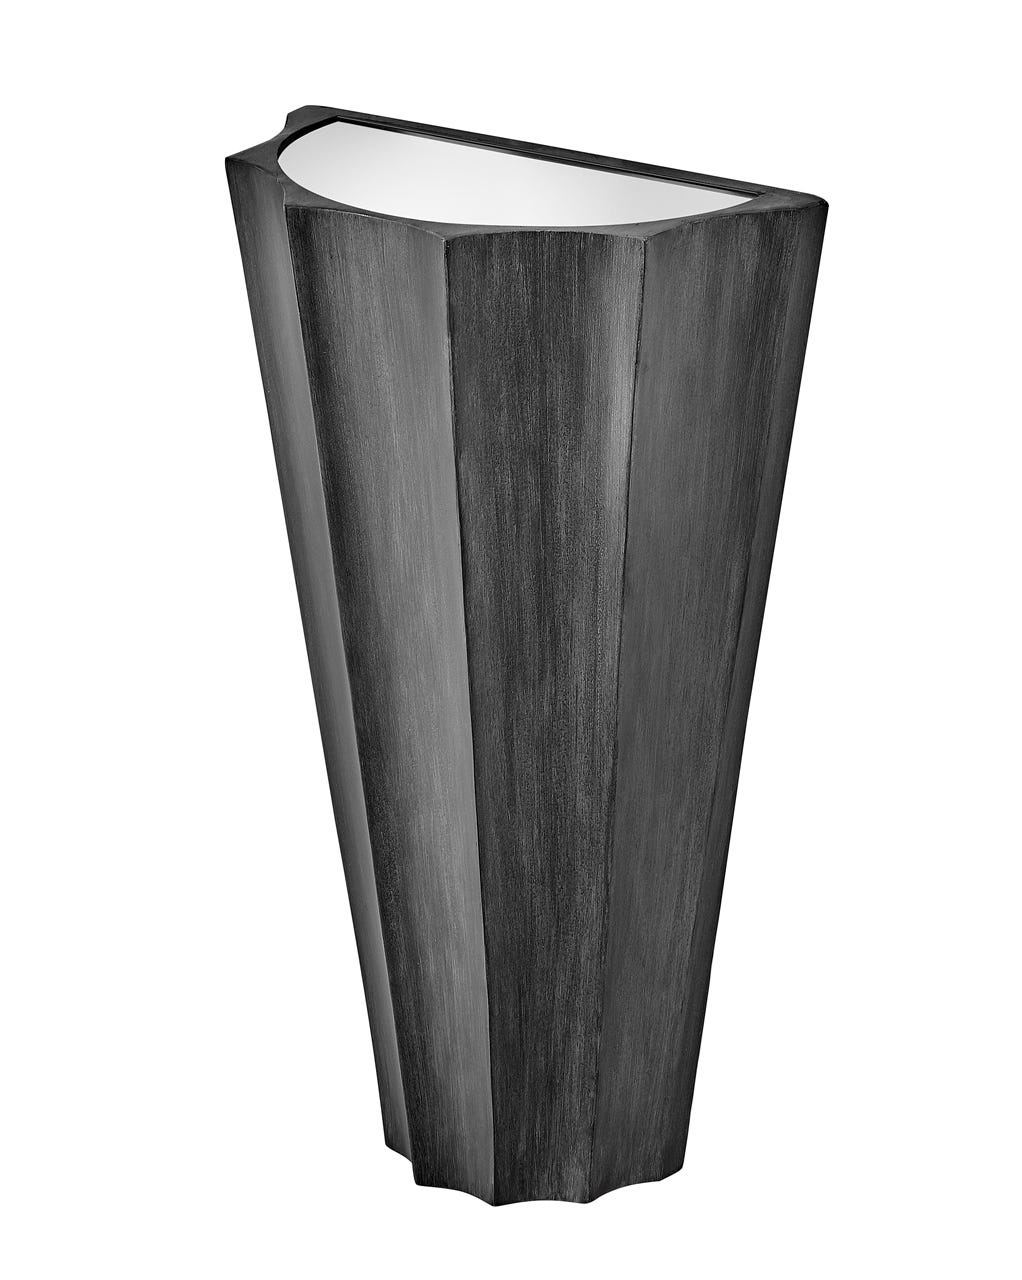 Hinkley Gia Sconce Sconce Hinkley Brushed Graphite 5.75x10.0x17.0 